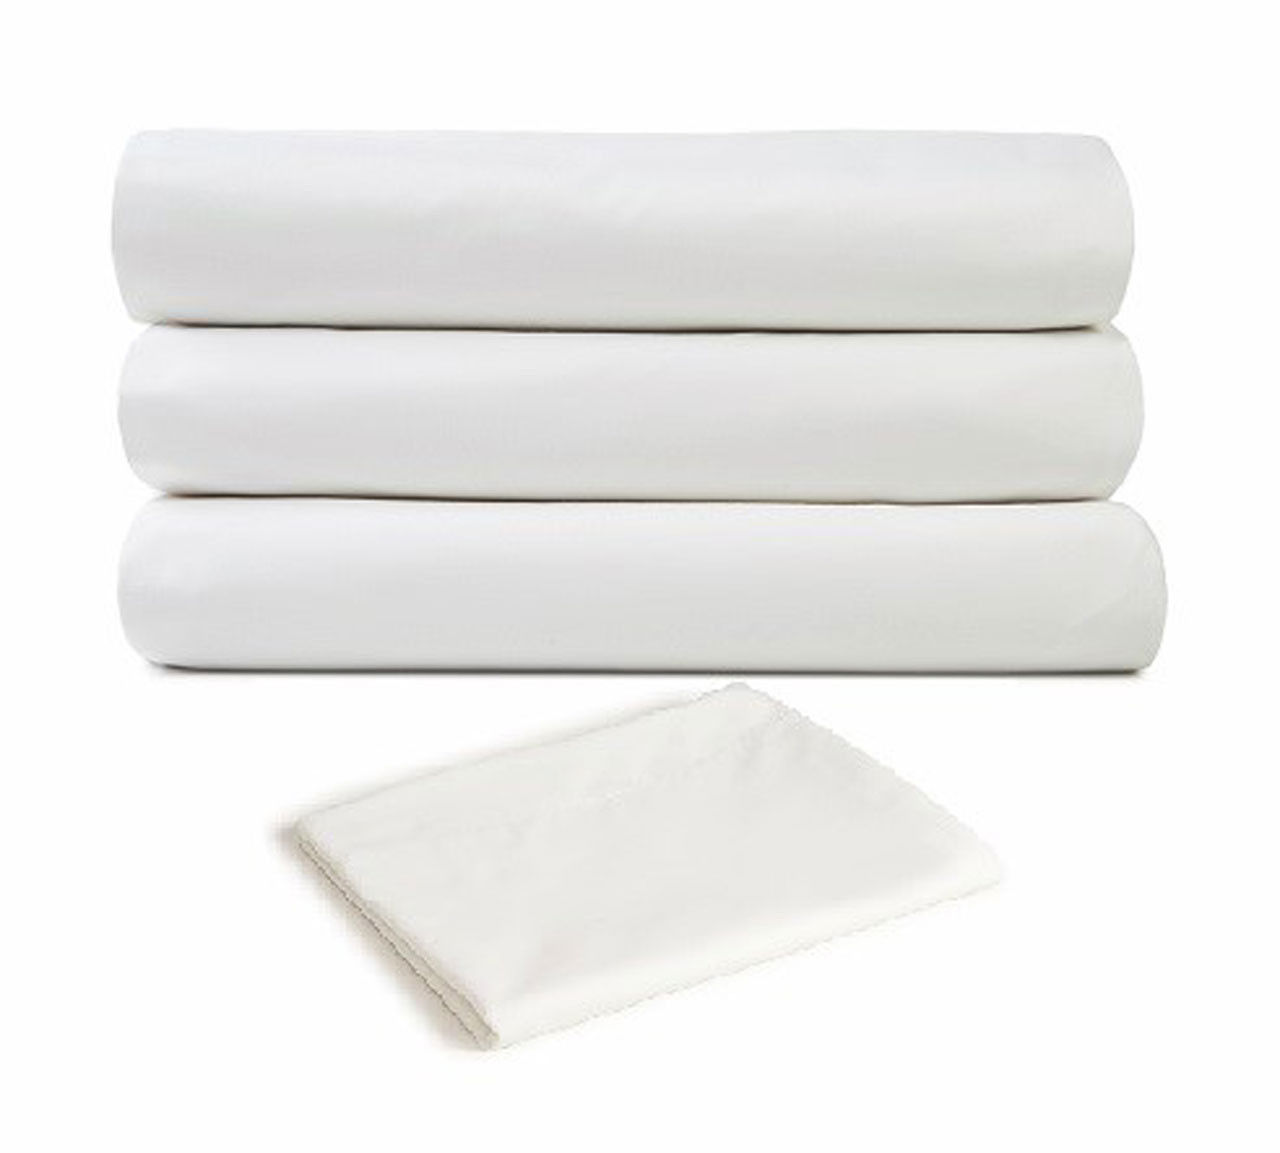 What is best of cotton polyester in bed sheets?